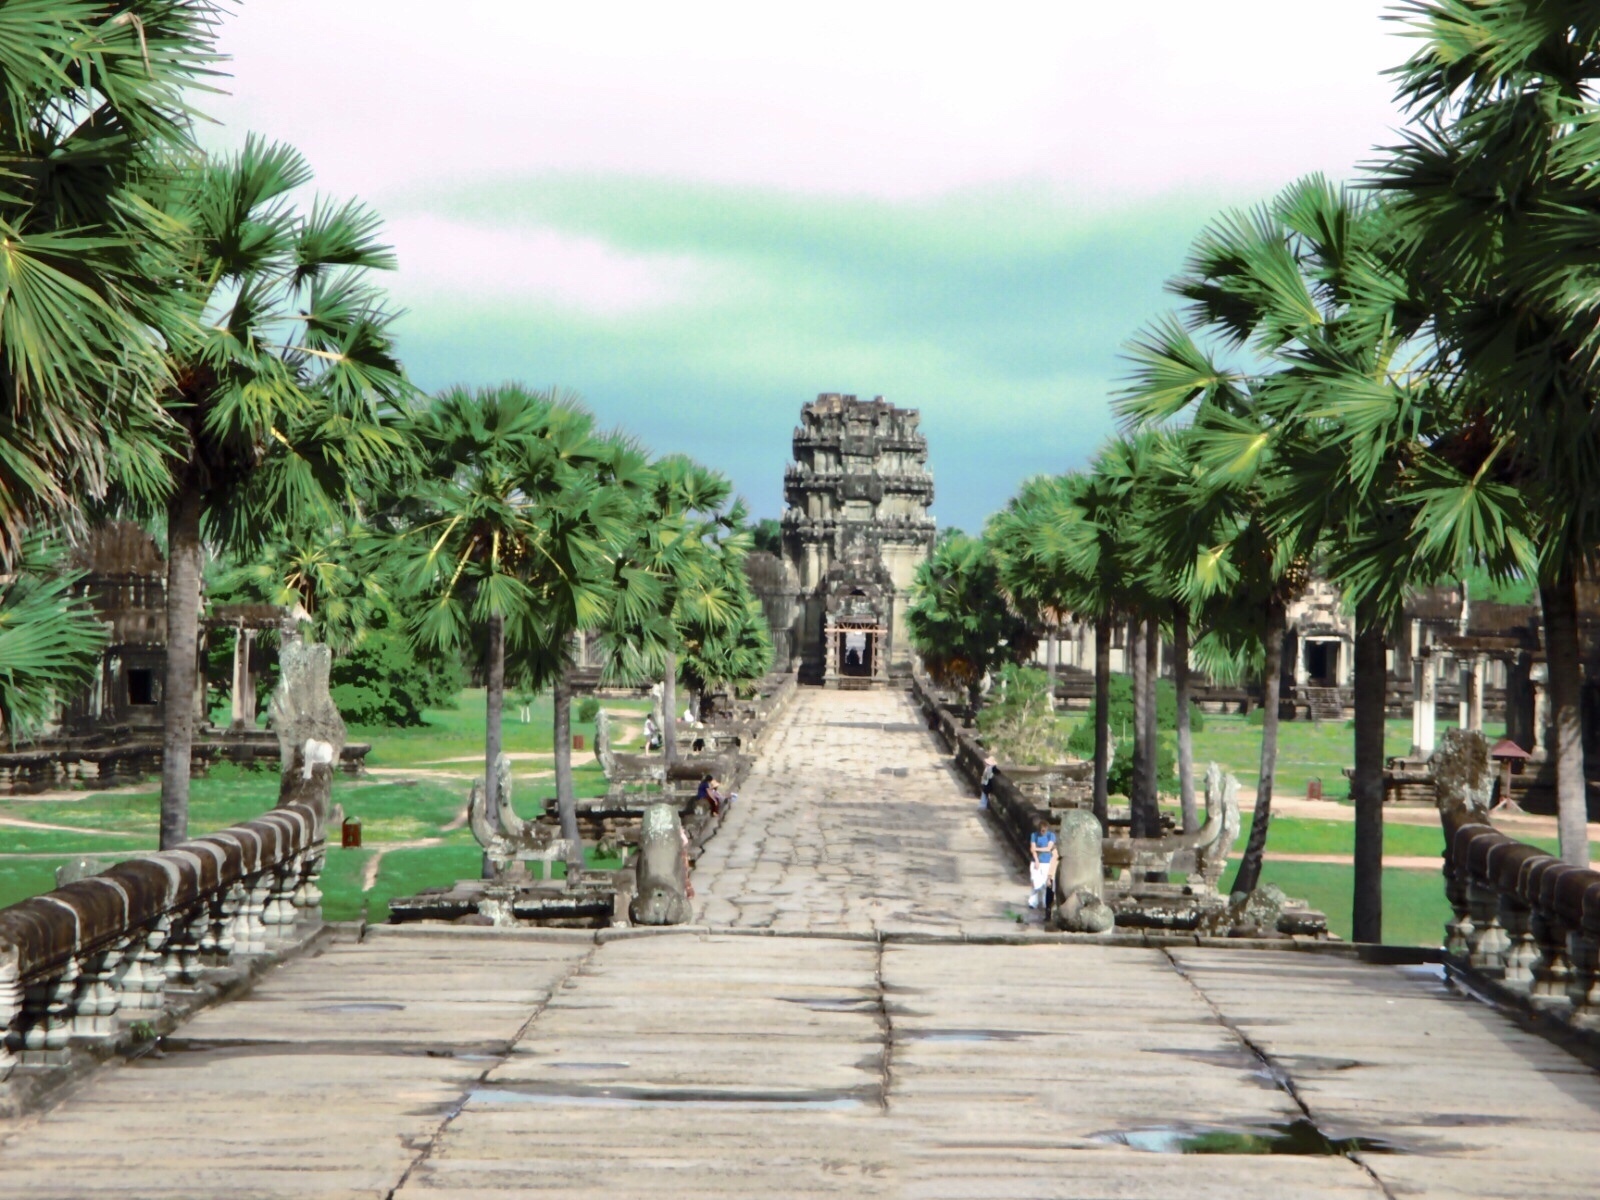 Picture-perfect entrance of Angkor Wat Temple surrounded by lush-green garden and palm trees